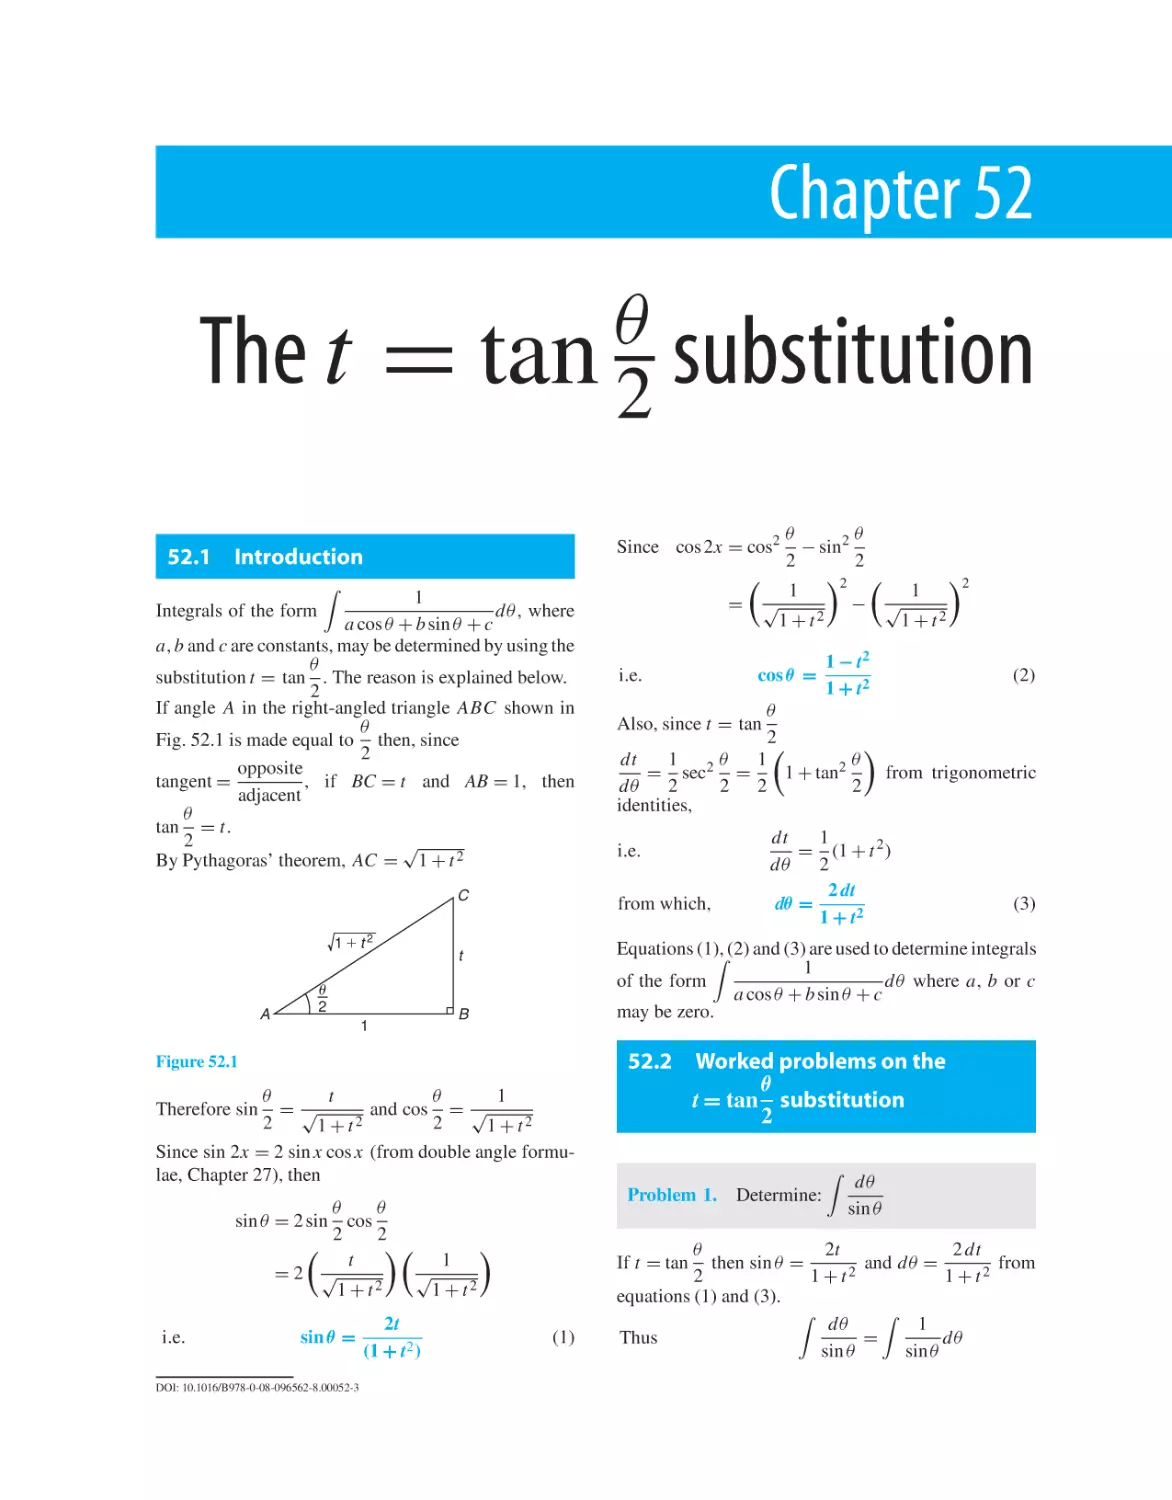 Chapter 52. The t = tanθ/2 substitution
52.1 Introduction
52.2 Worked problems on the t = tanθ/2 substitution